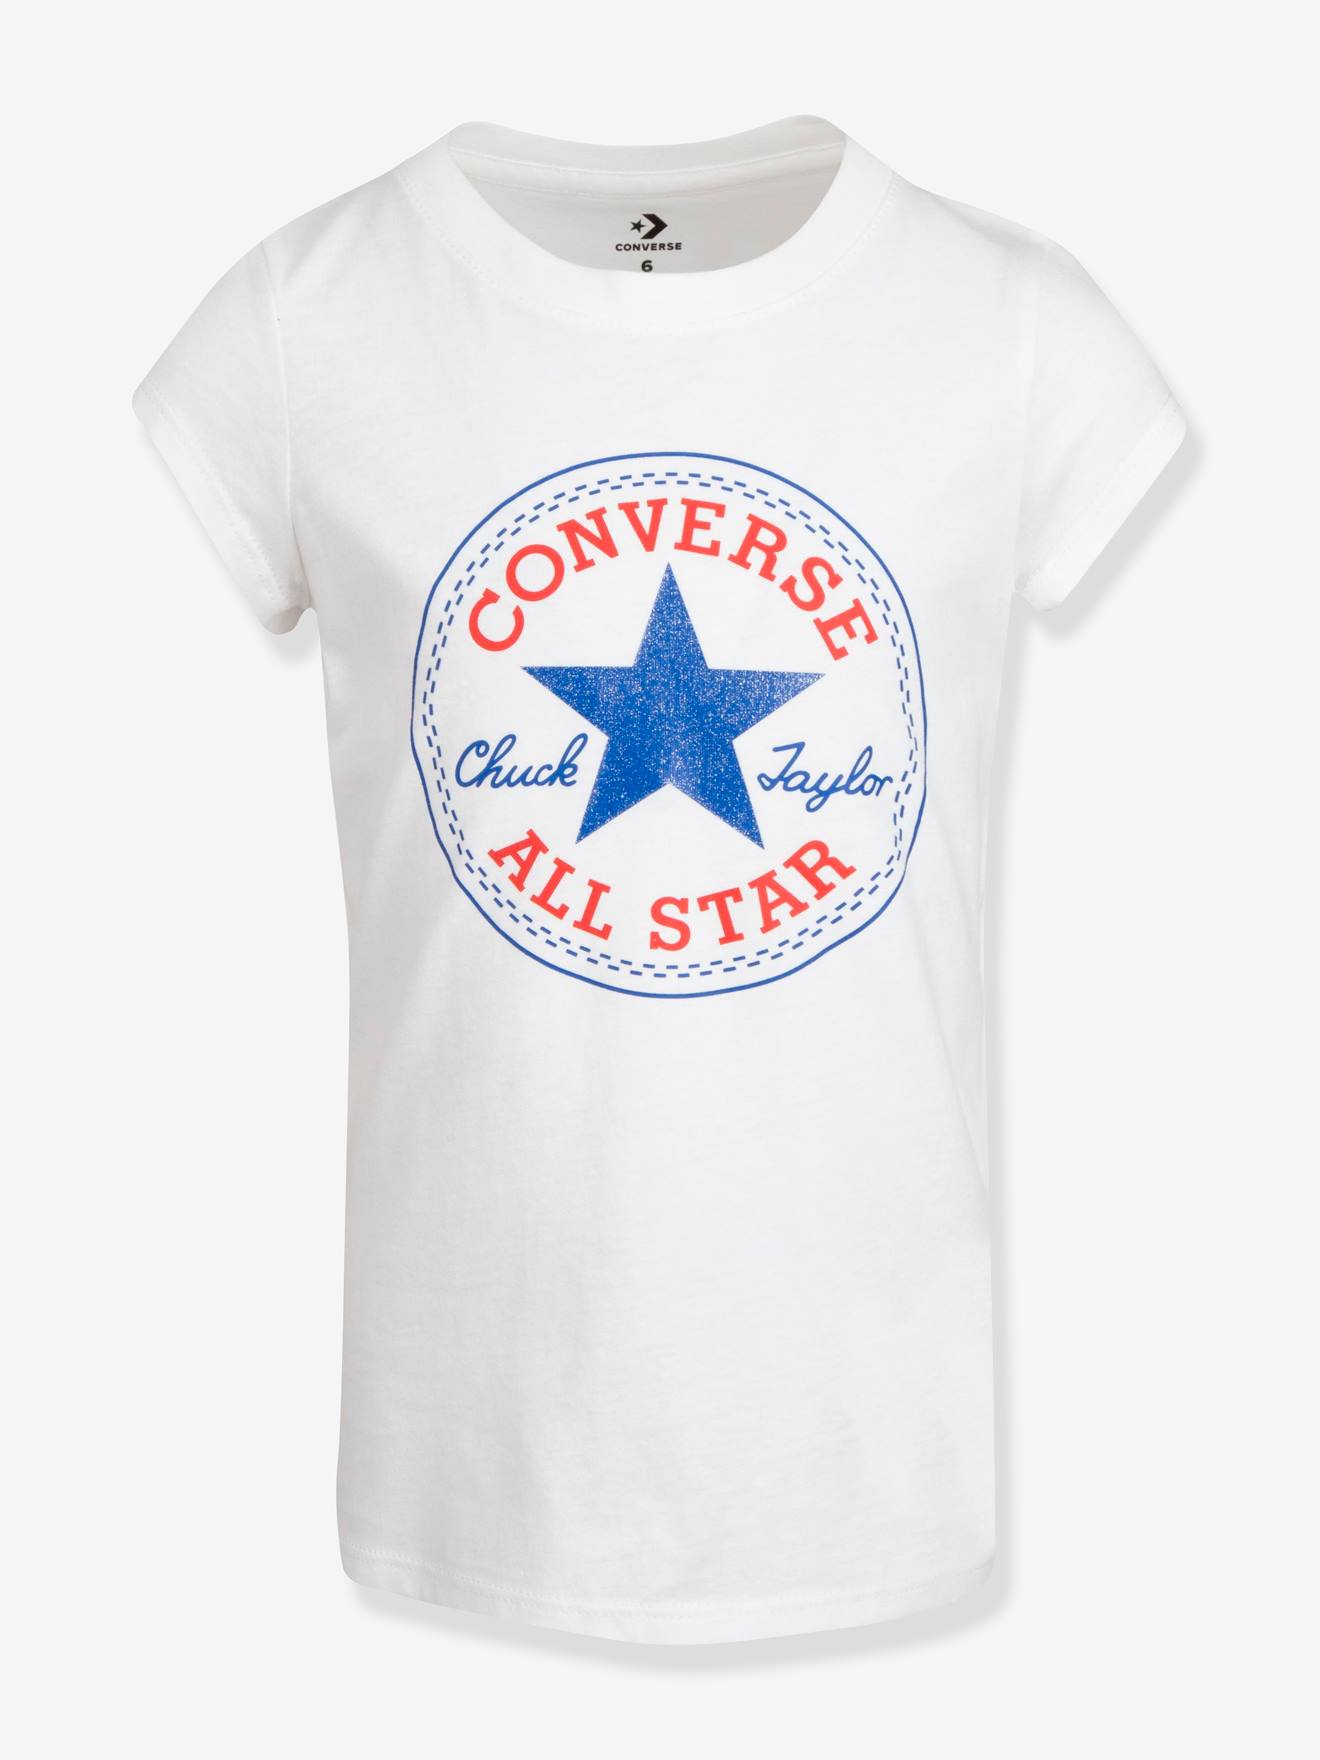 T-shirt for Children, Chuck Patch by CONVERSE white